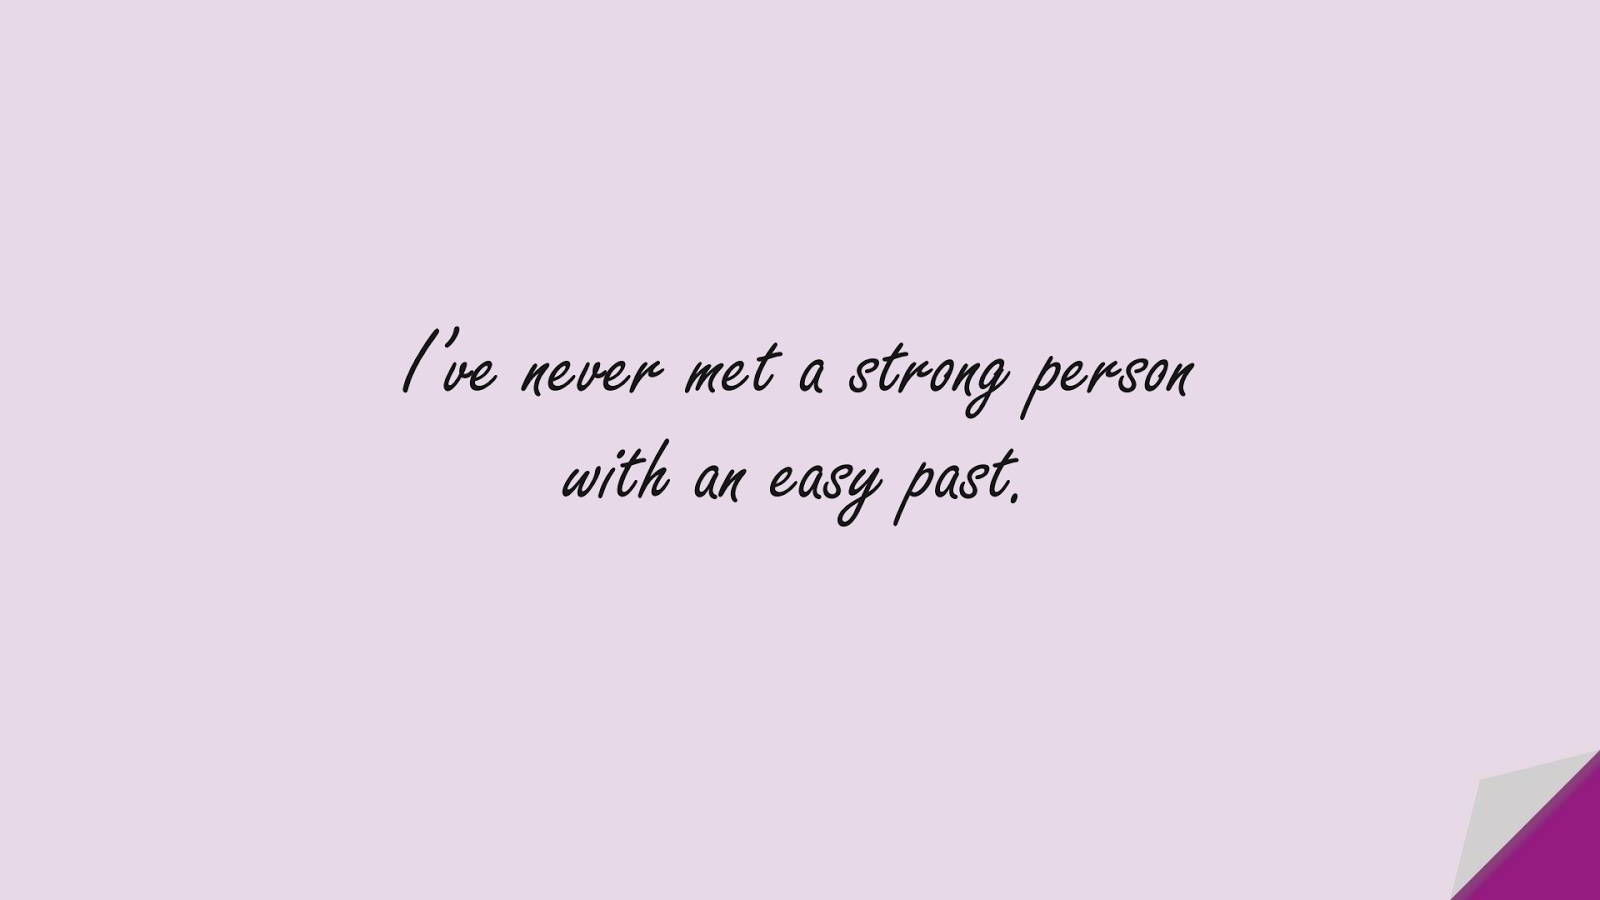 I’ve never met a strong person with an easy past.FALSE